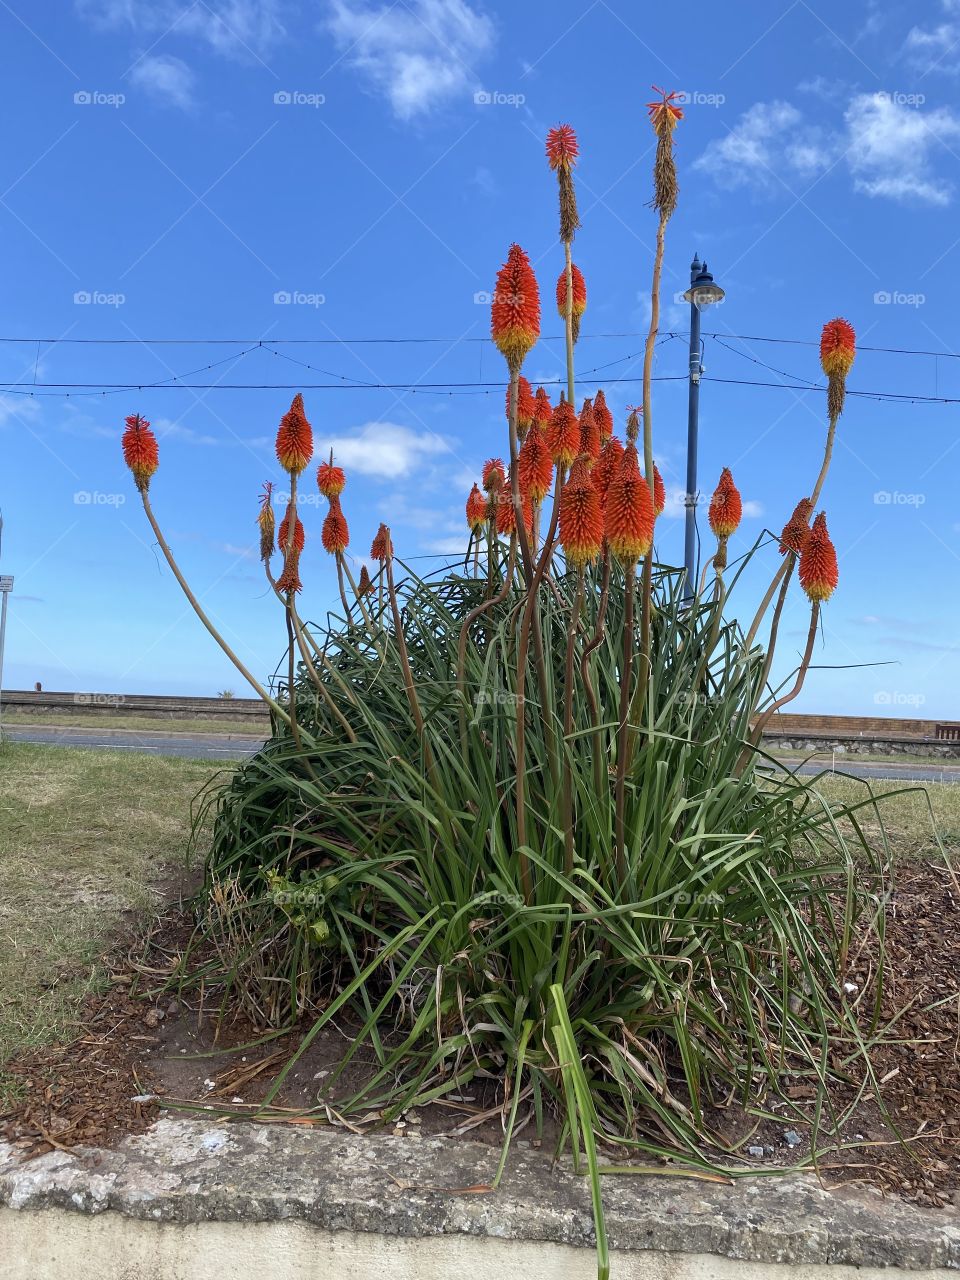 Some outstanding ”red hot pokers” offering quite a presence on Teignmouth, Devon seafront.